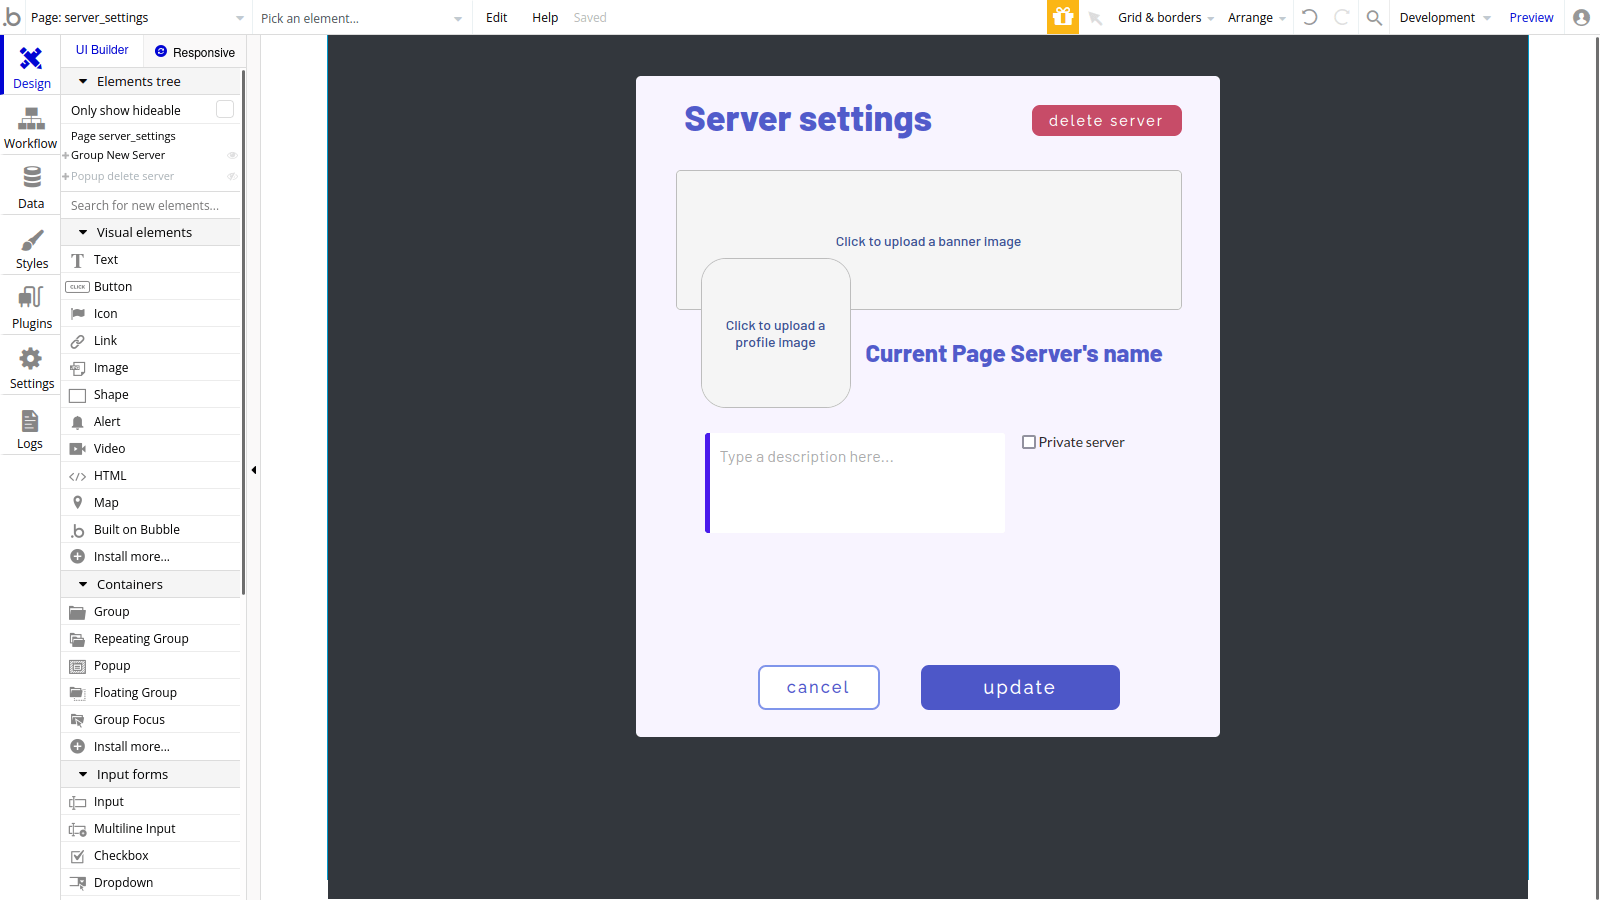 Allowing users to update server settings in our no-code Discord-like MVP